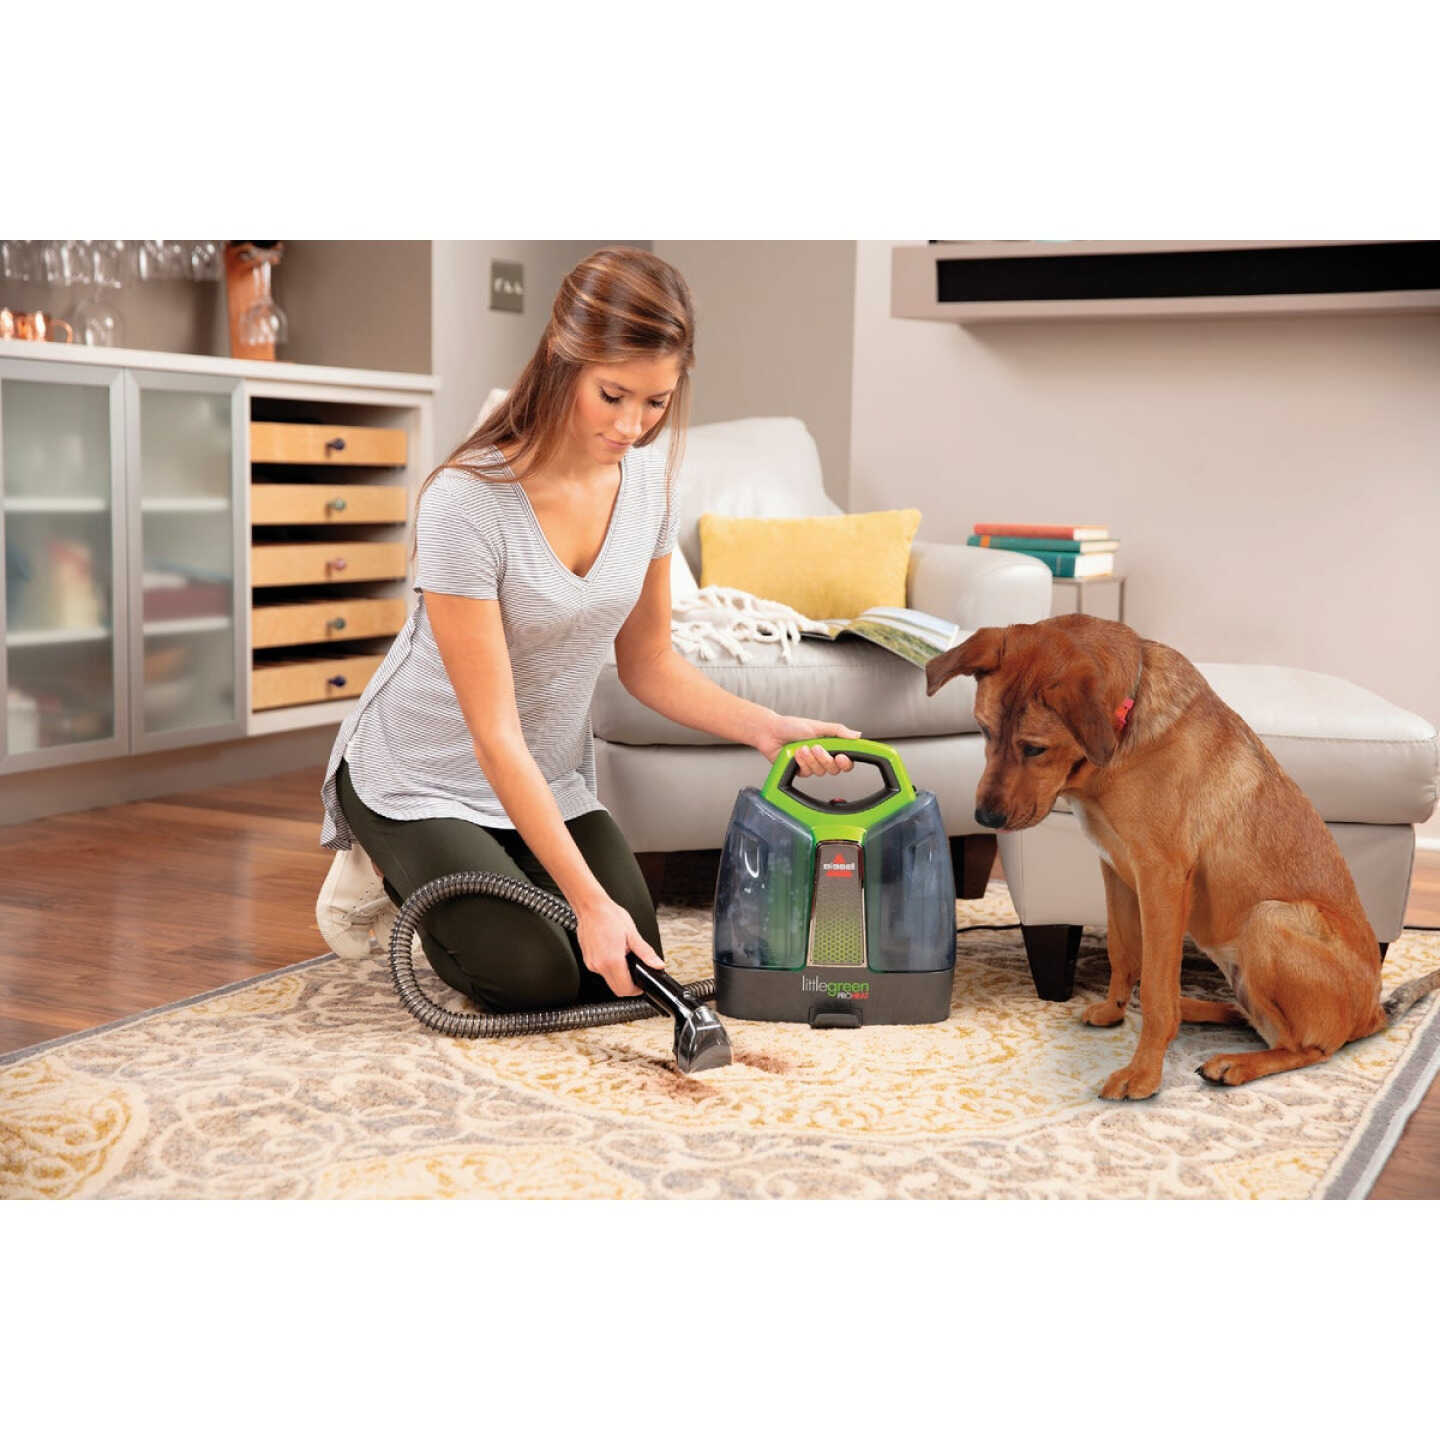 Bissell Little Green ProHeat Portable Carpet Cleaner Machine